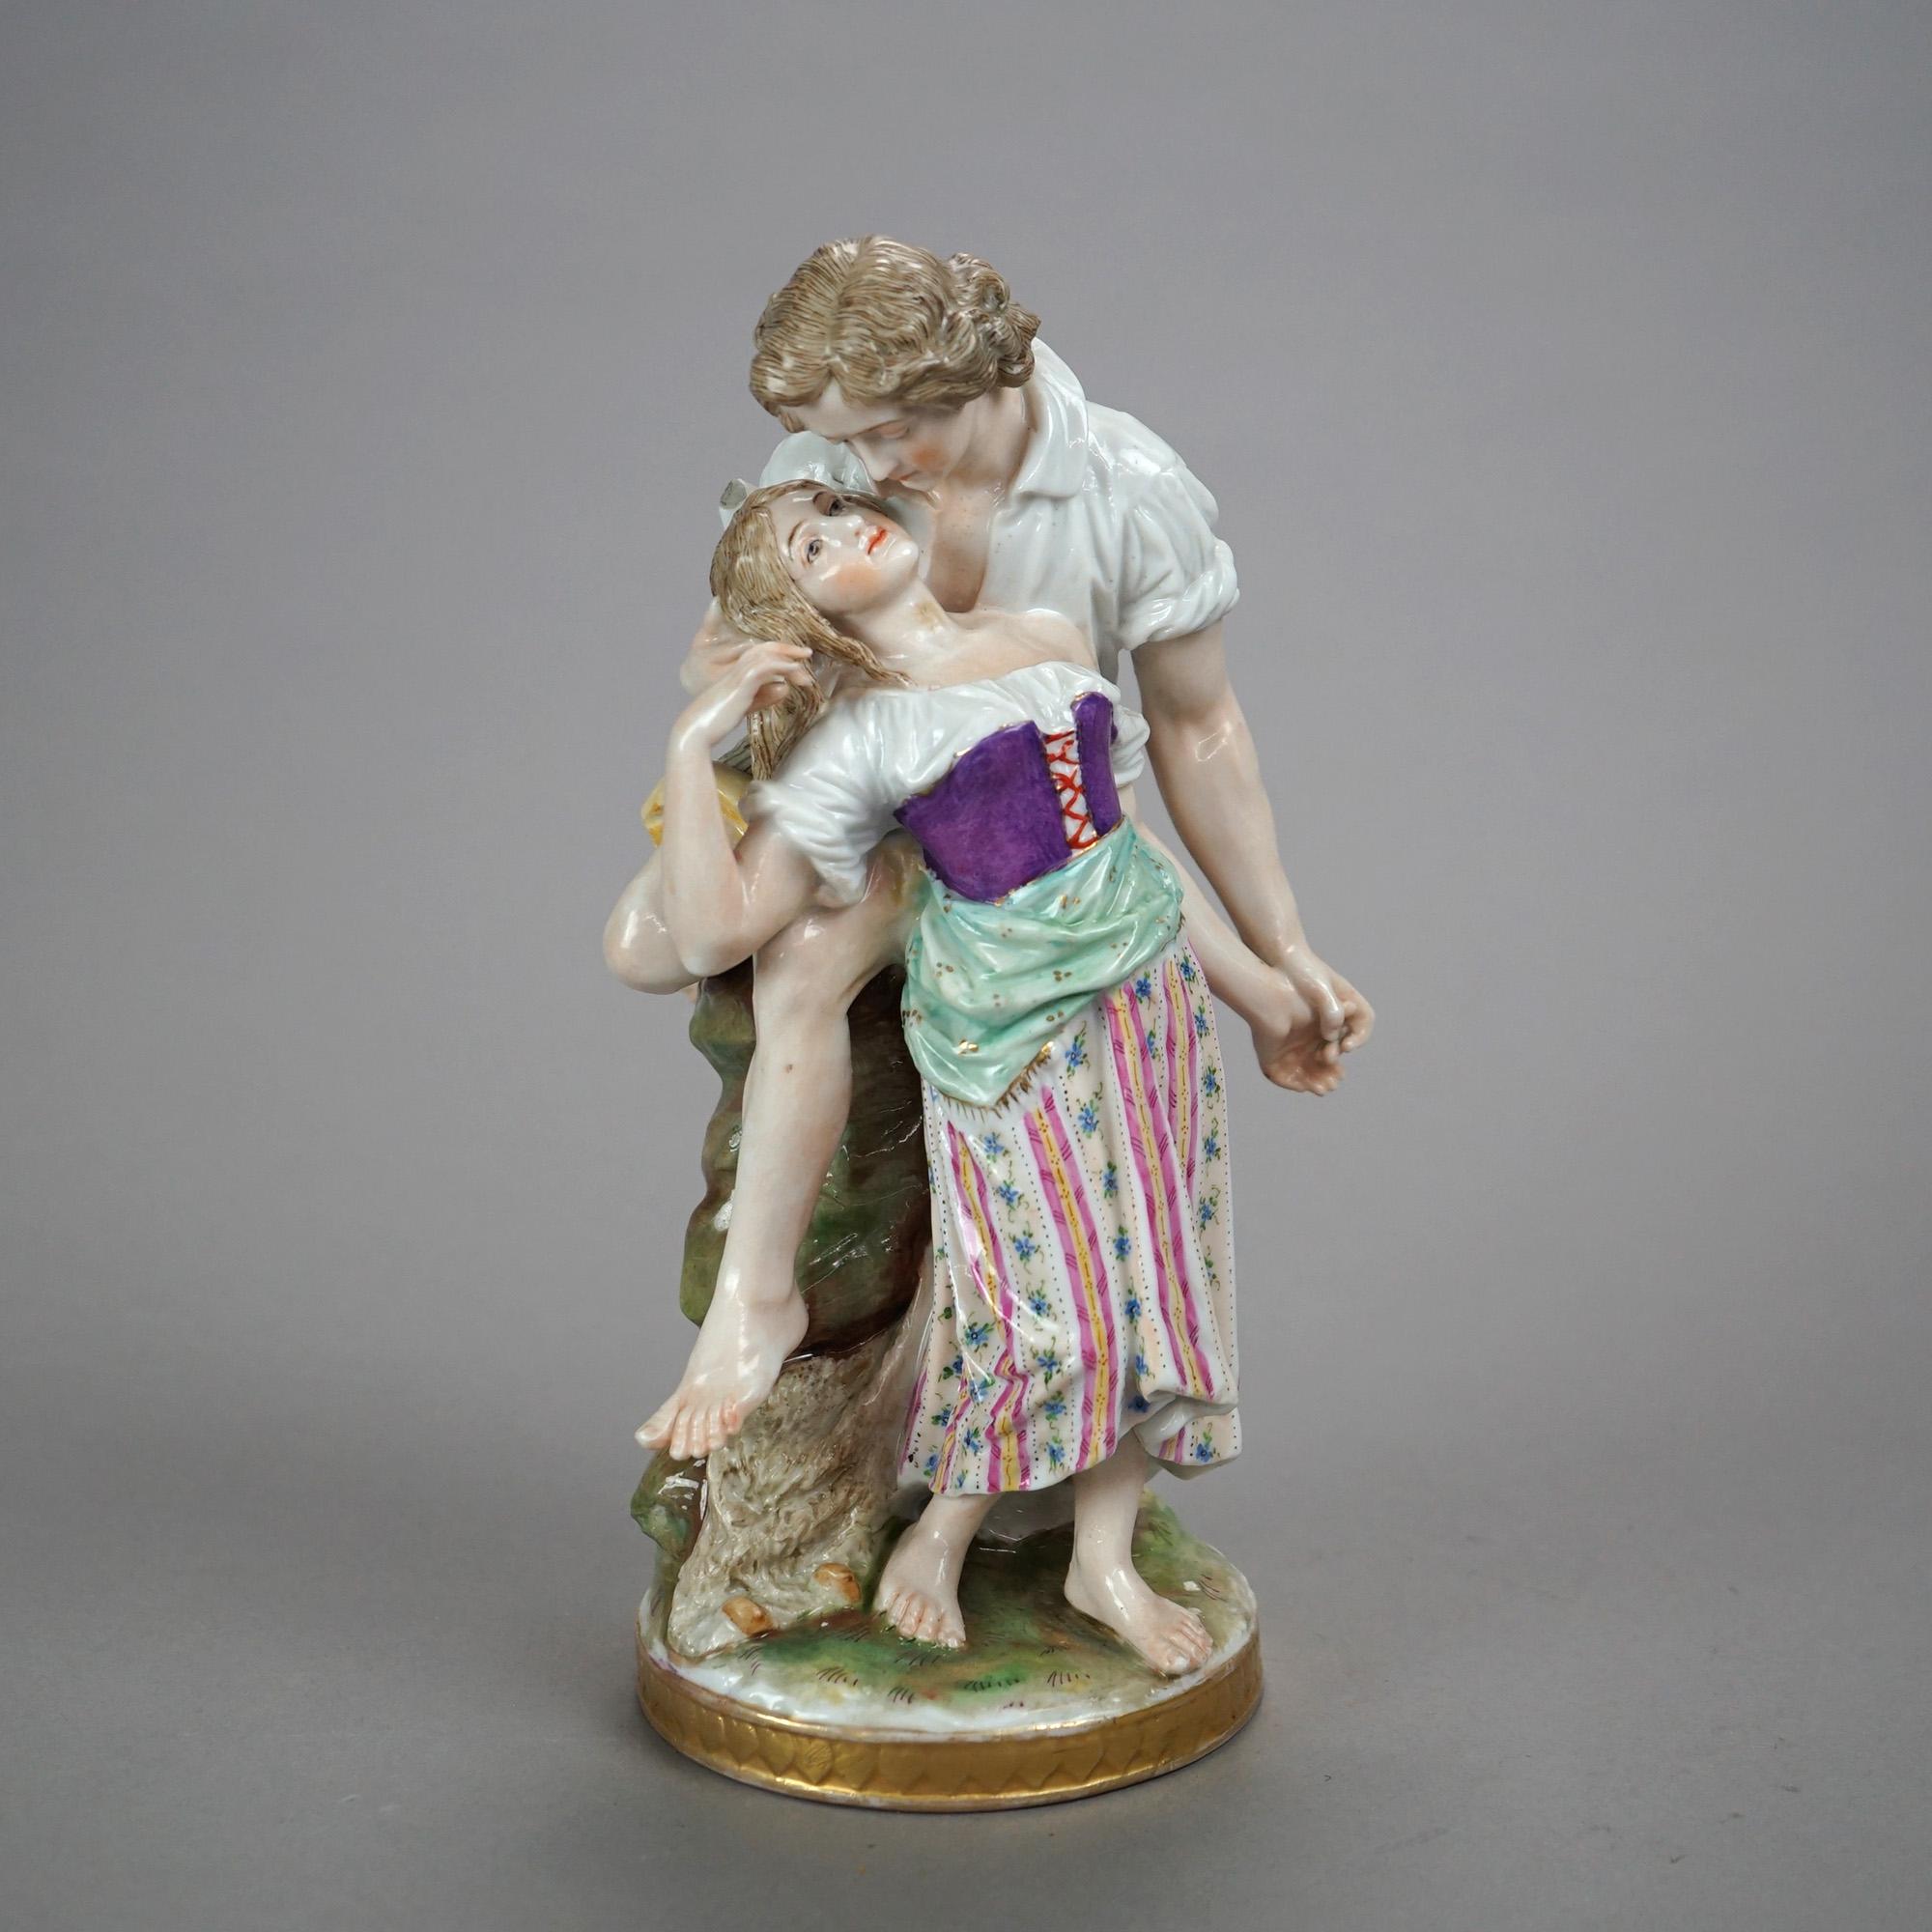 An antique German figural grouping by Königliche Porzellan-Manufaktur (KPM) of Berlin, Germany offers porcelain construction with hand painted courting couple in countryside setting, maker marks on base as photographed, c1890

Measures- 9.5''H x